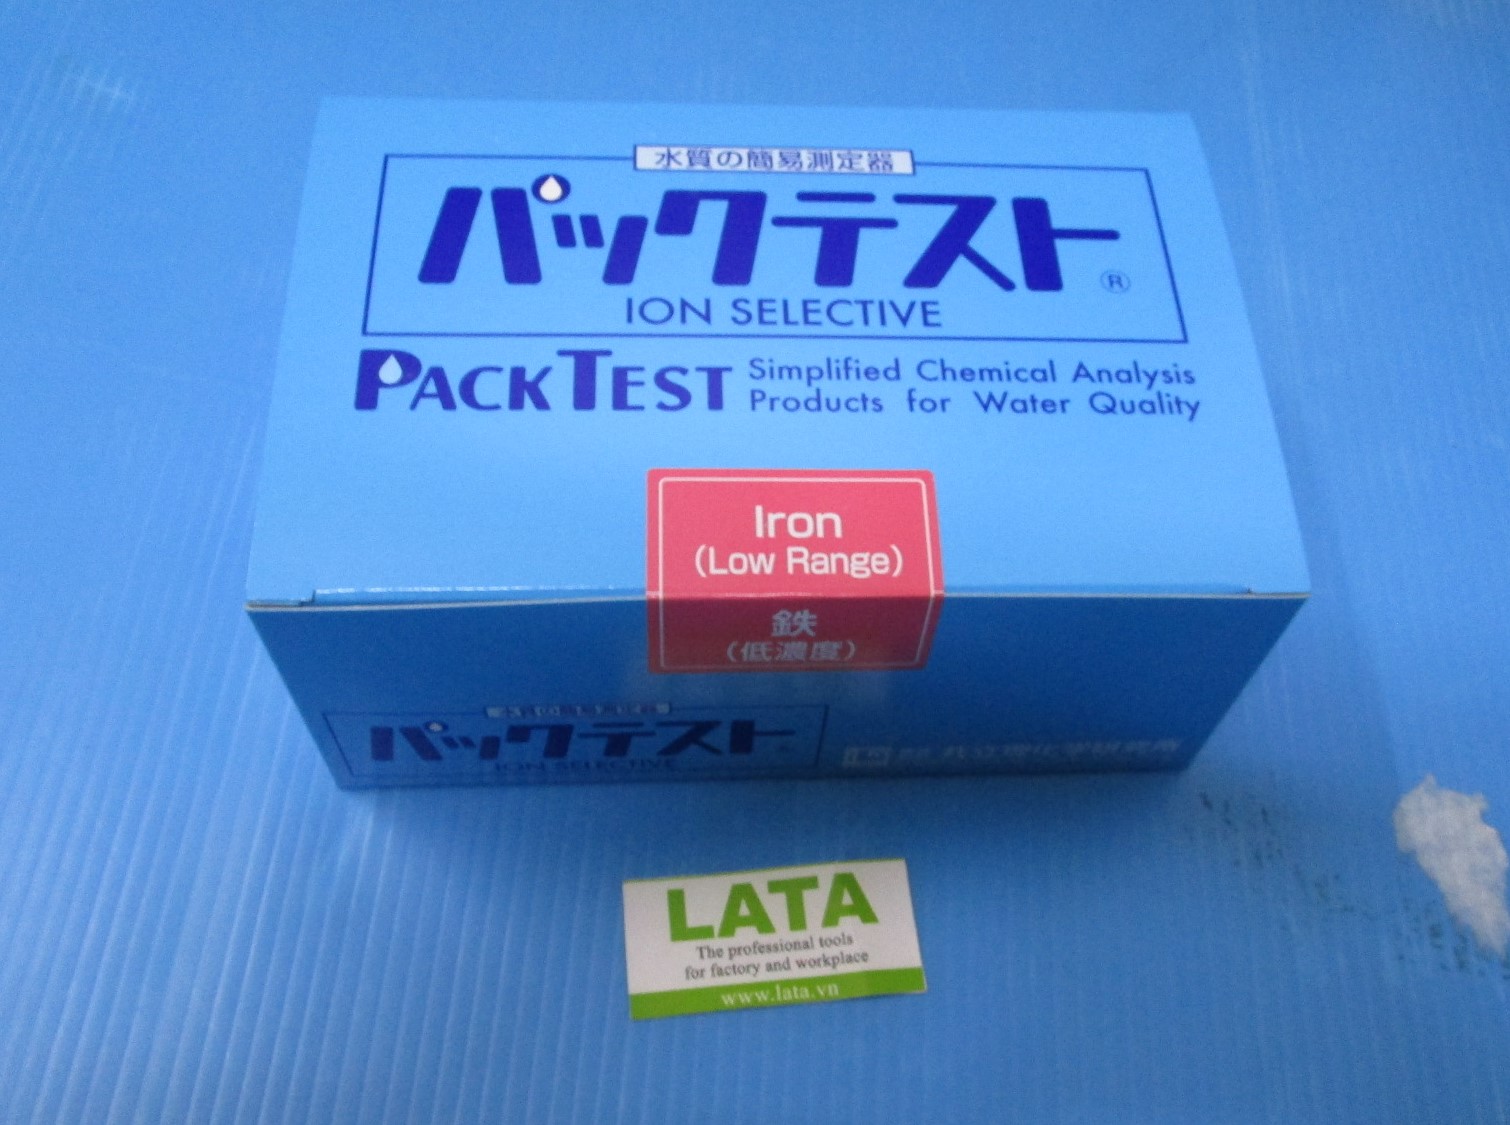 Pack Test(R) Iron (Water quality inspection equipment) Dụng cụ thử mẫu WAK-Fe